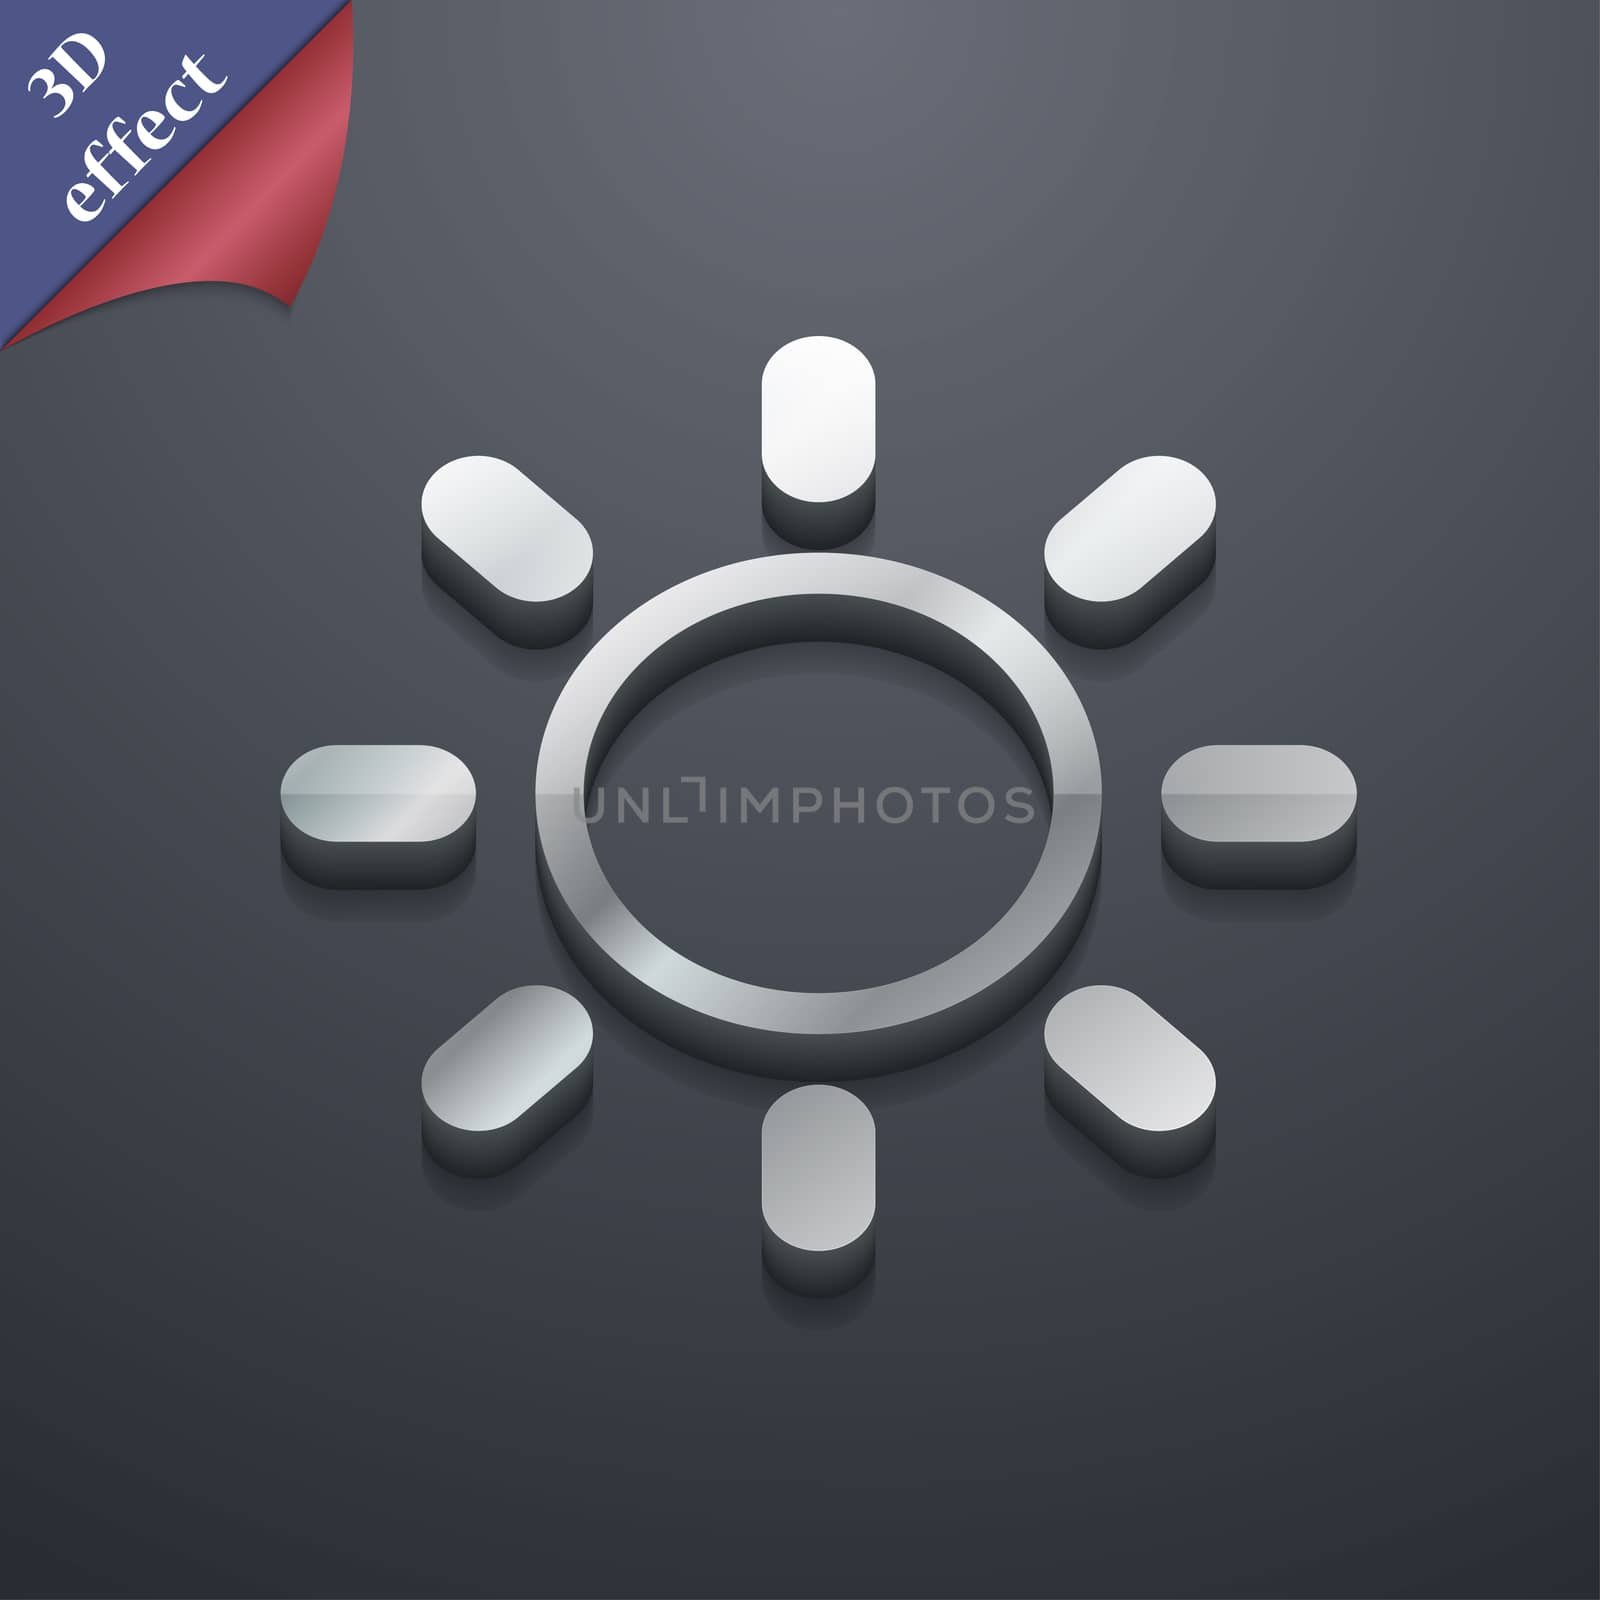 Brightness icon symbol. 3D style. Trendy, modern design with space for your text illustration. Rastrized copy